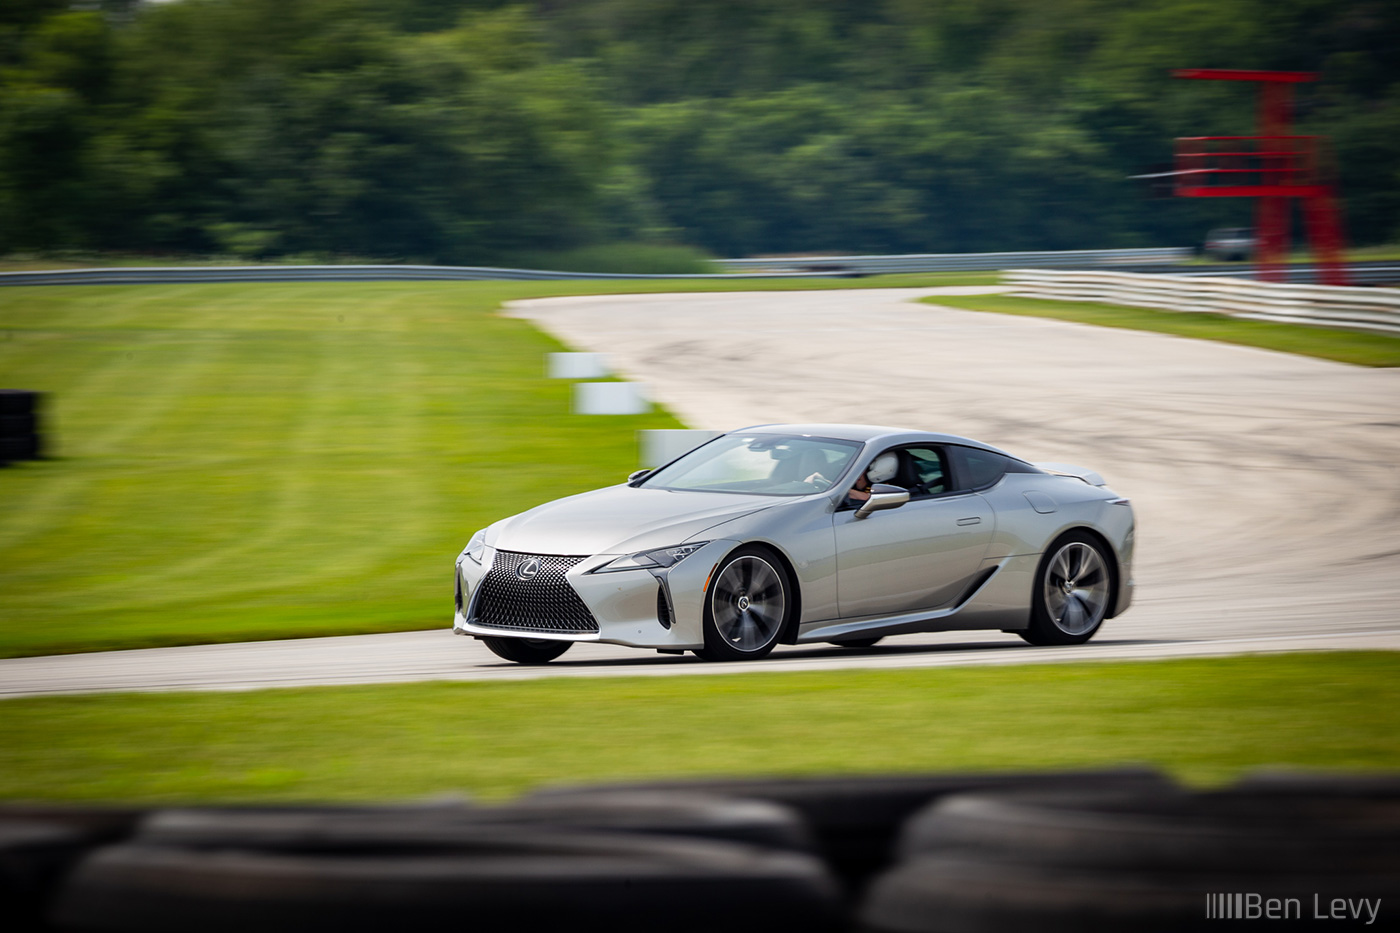 Mark (SavageGeese) driving his Lexus LC500 at Autobahn Country Club